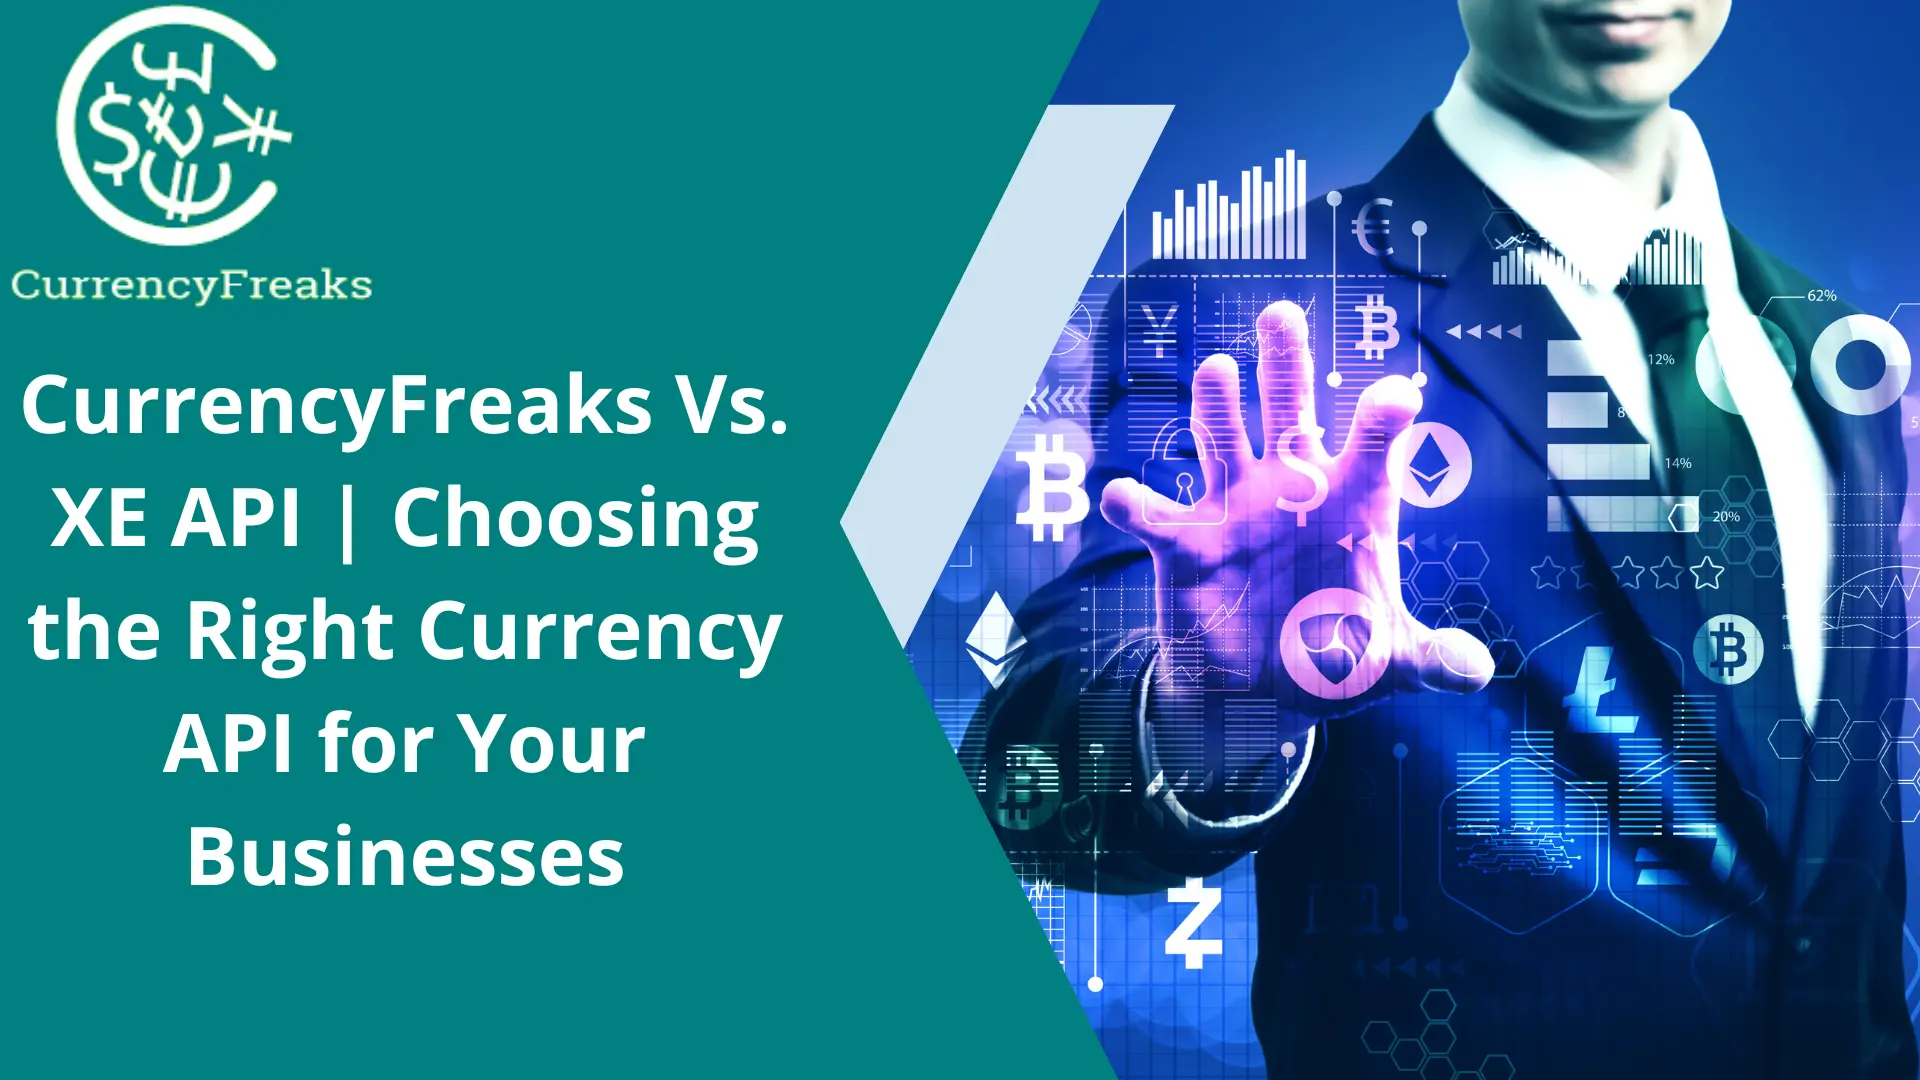 XE API Vs. CurrencyFreaks | Choosing the Right Currency API for Your Businesses